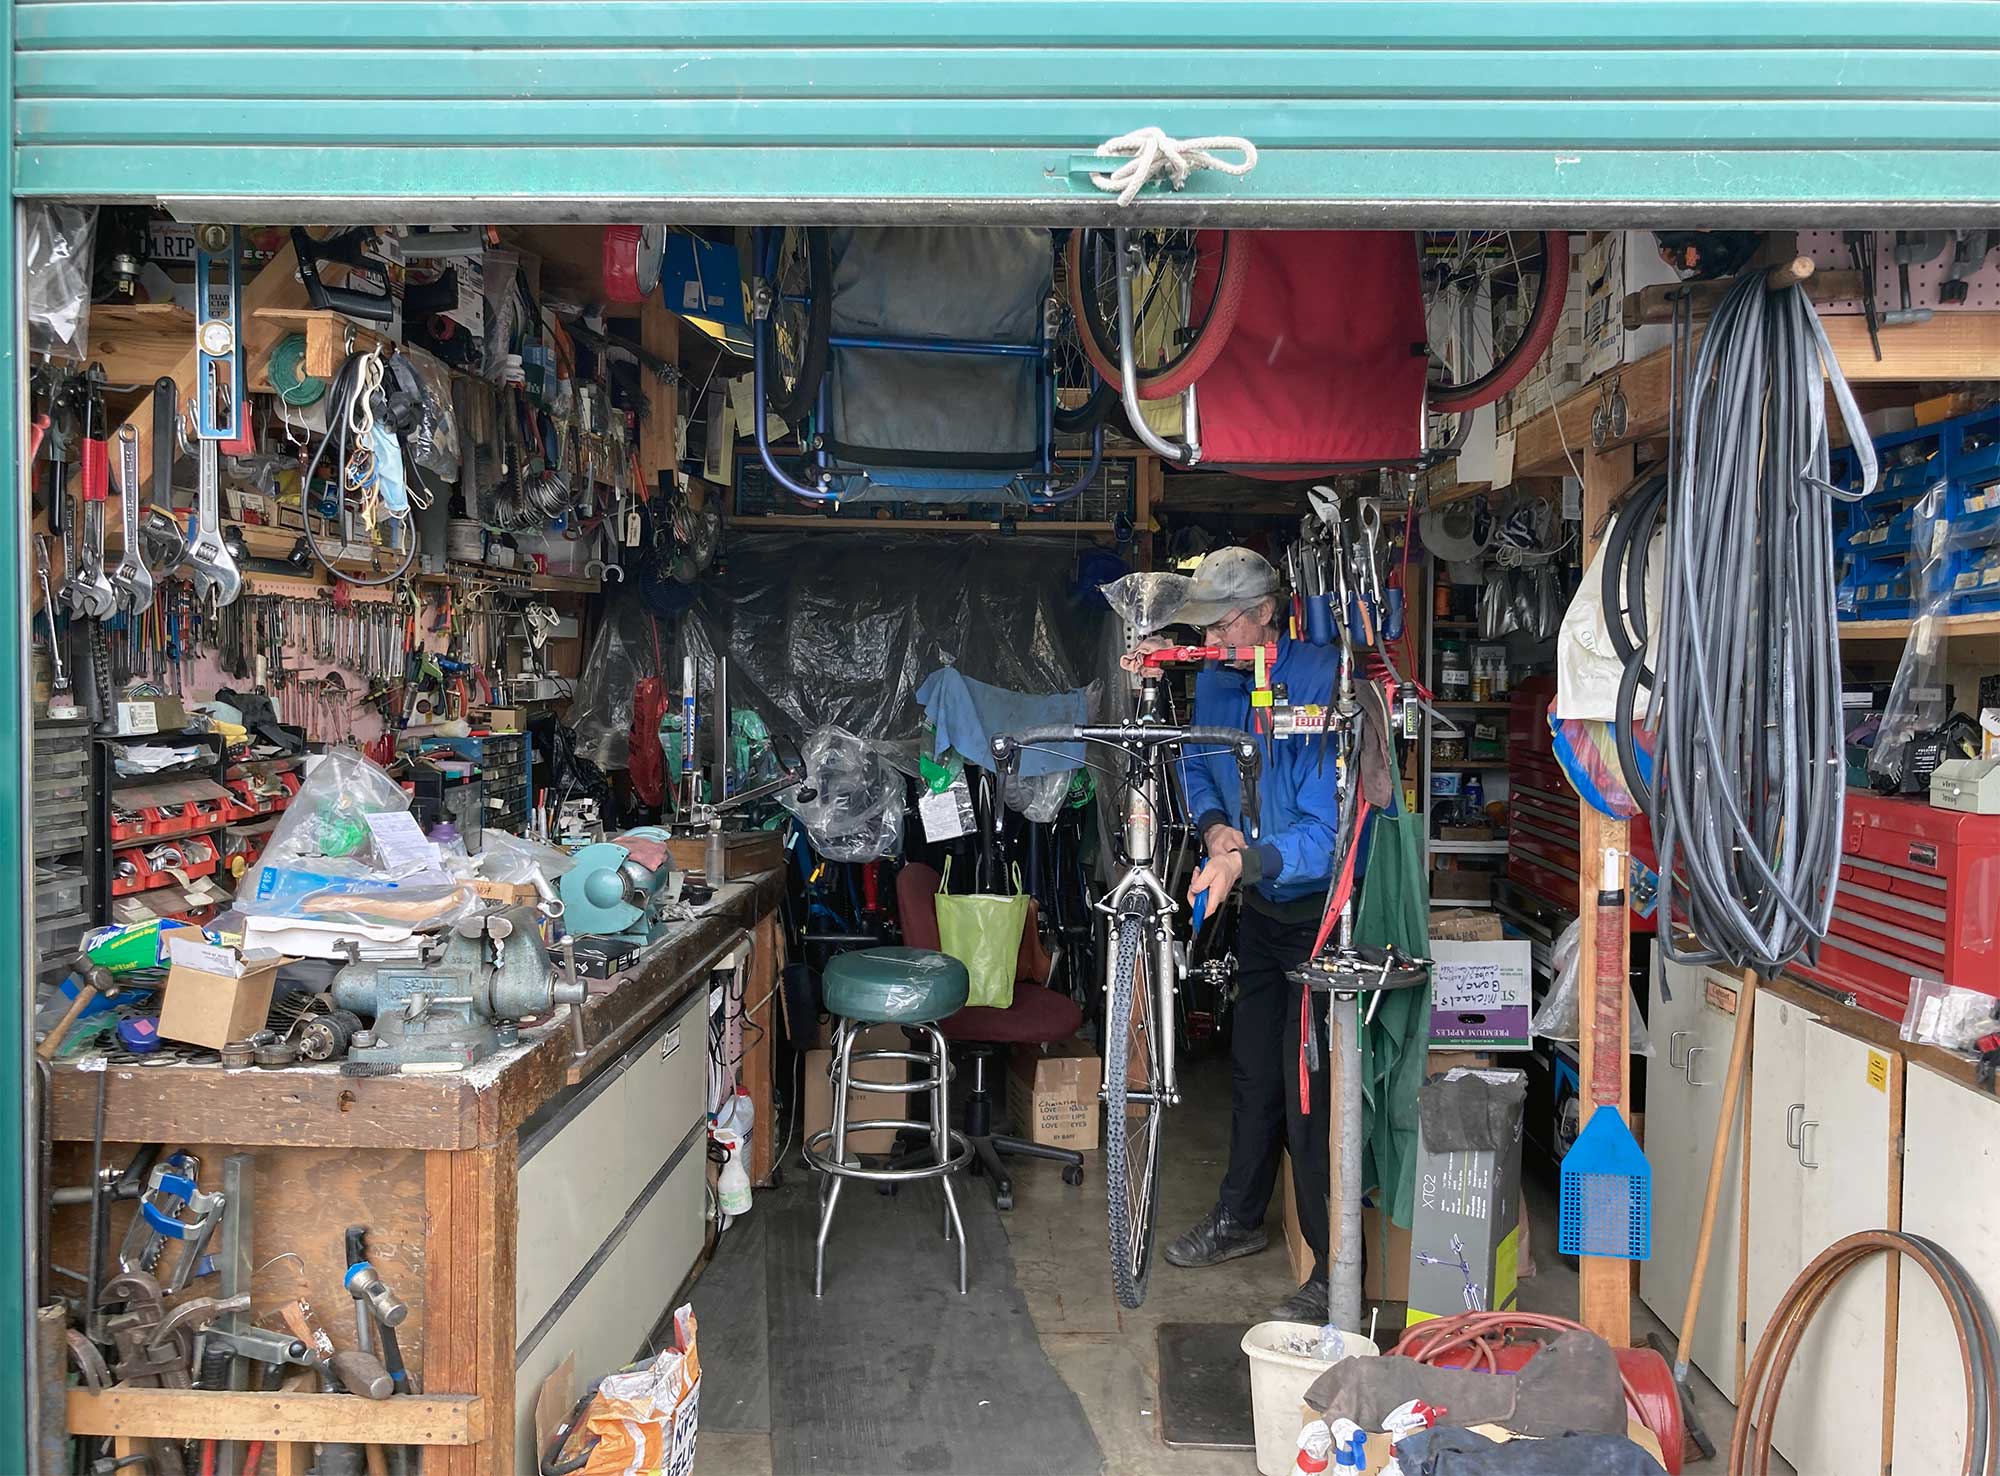 An open storage shed with a man working on a bike and bike tools, parts, gear, stools, and workbench around him